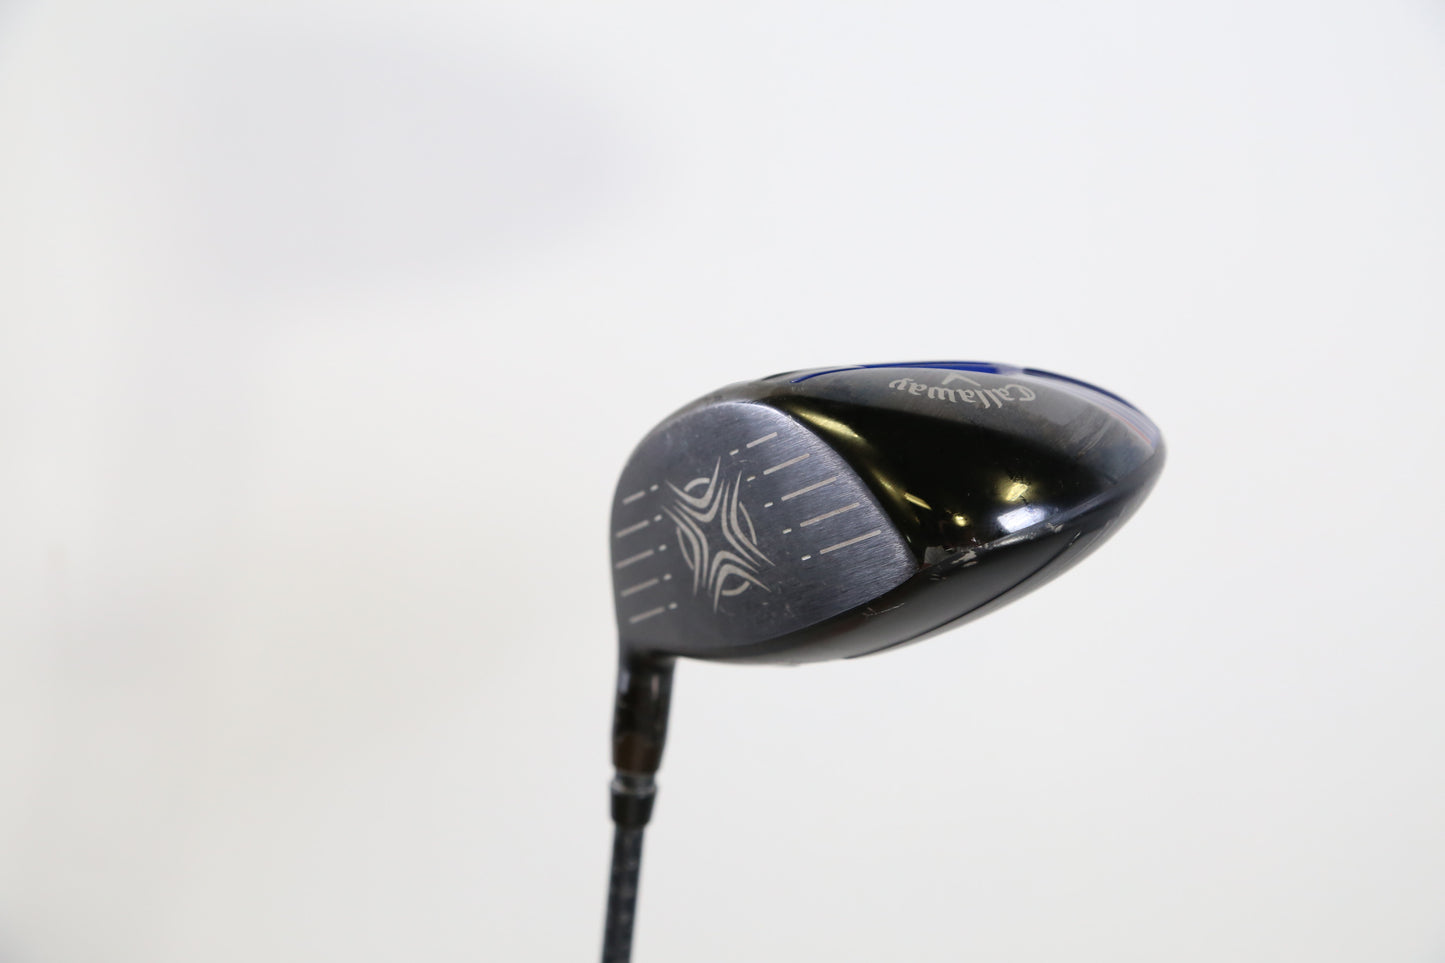 Used Callaway XR Driver - Right-Handed - 9 Degrees - Regular Plus Flex